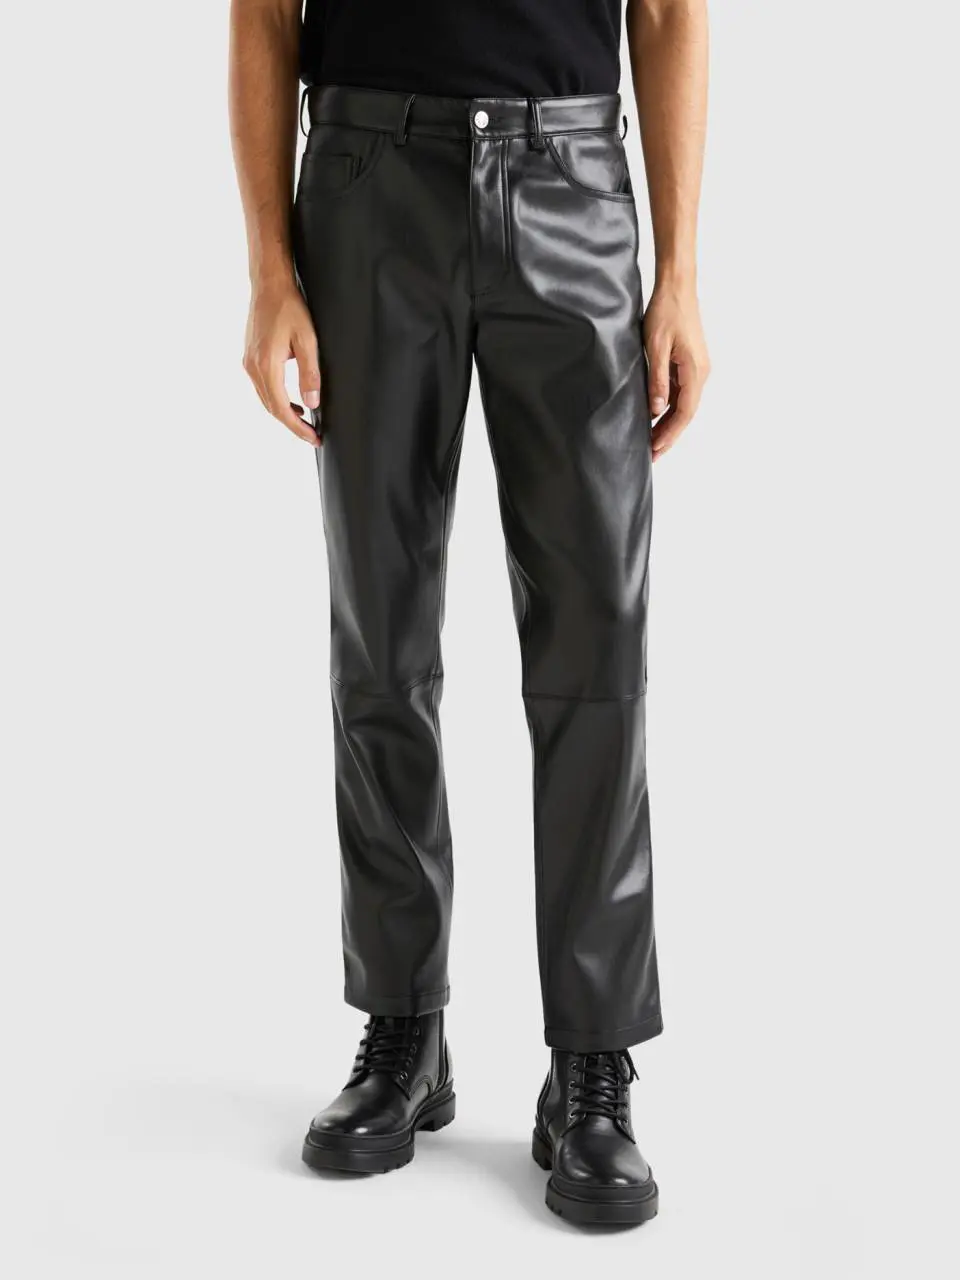 Benetton trousers in imitation leather fabric. 1